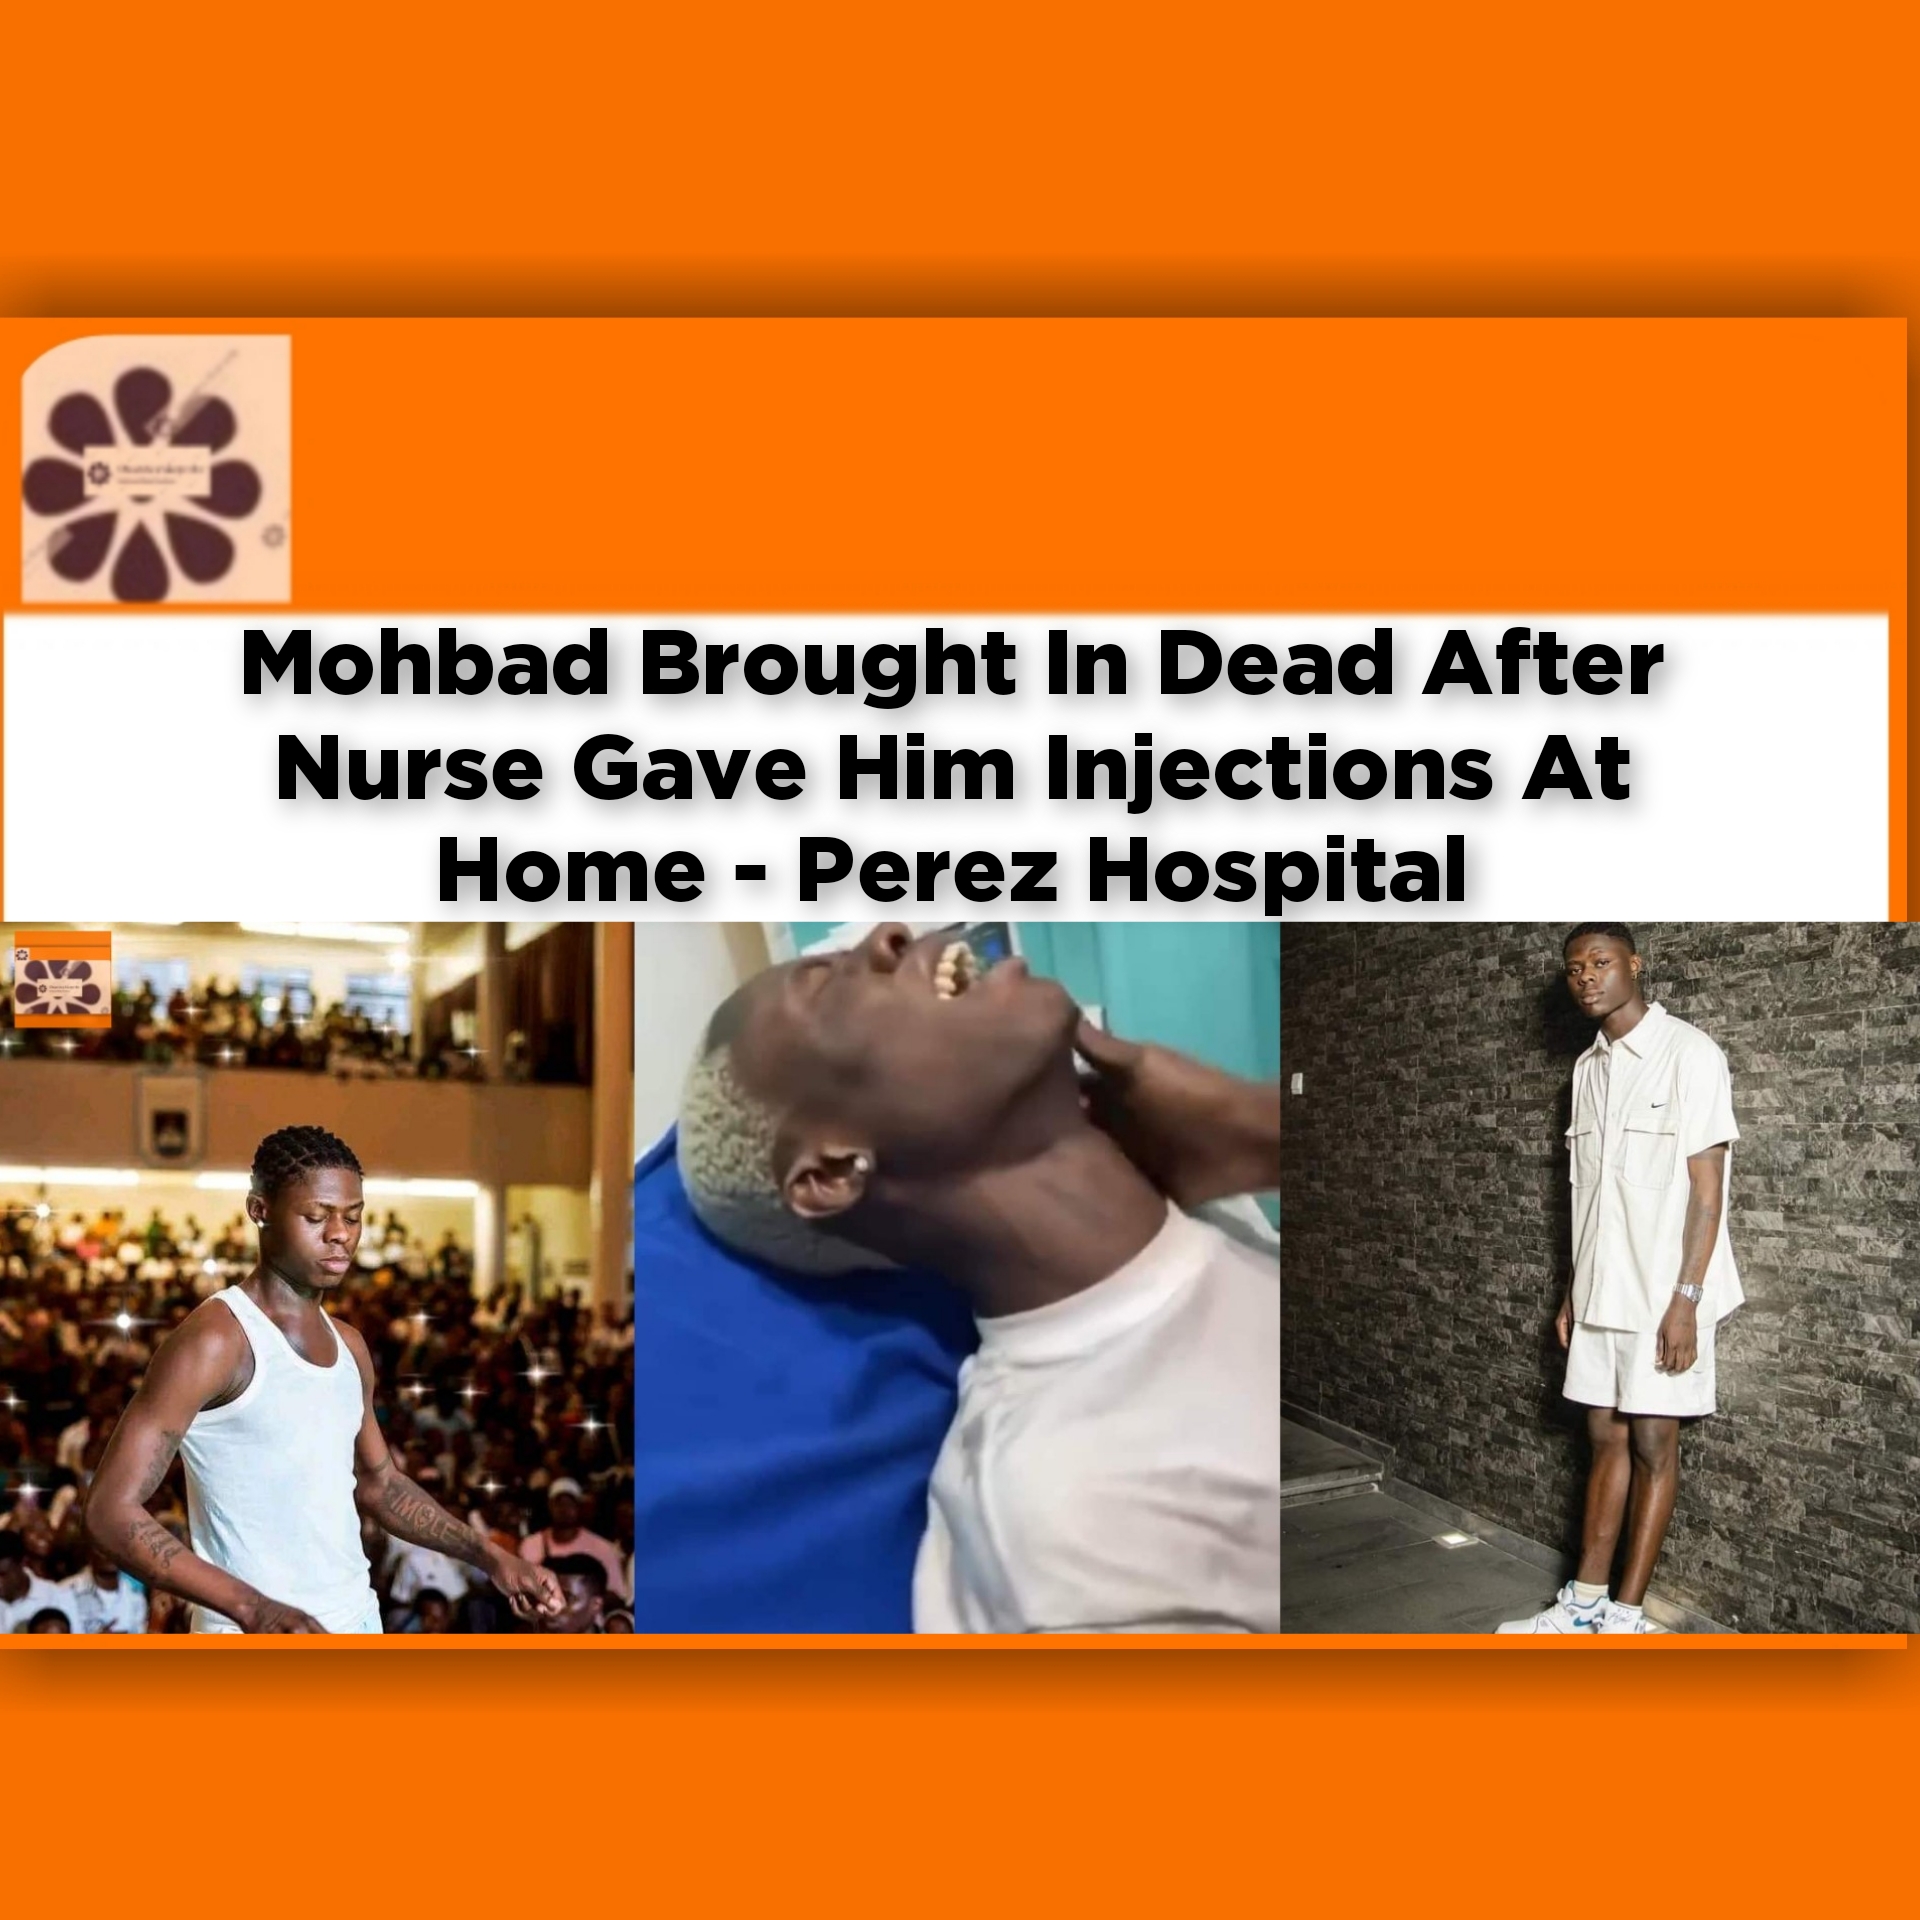 Mohbad Brought In Dead After Nurse Gave Him Injections At Home - Perez Hospital ~ OsazuwaAkonedo #government